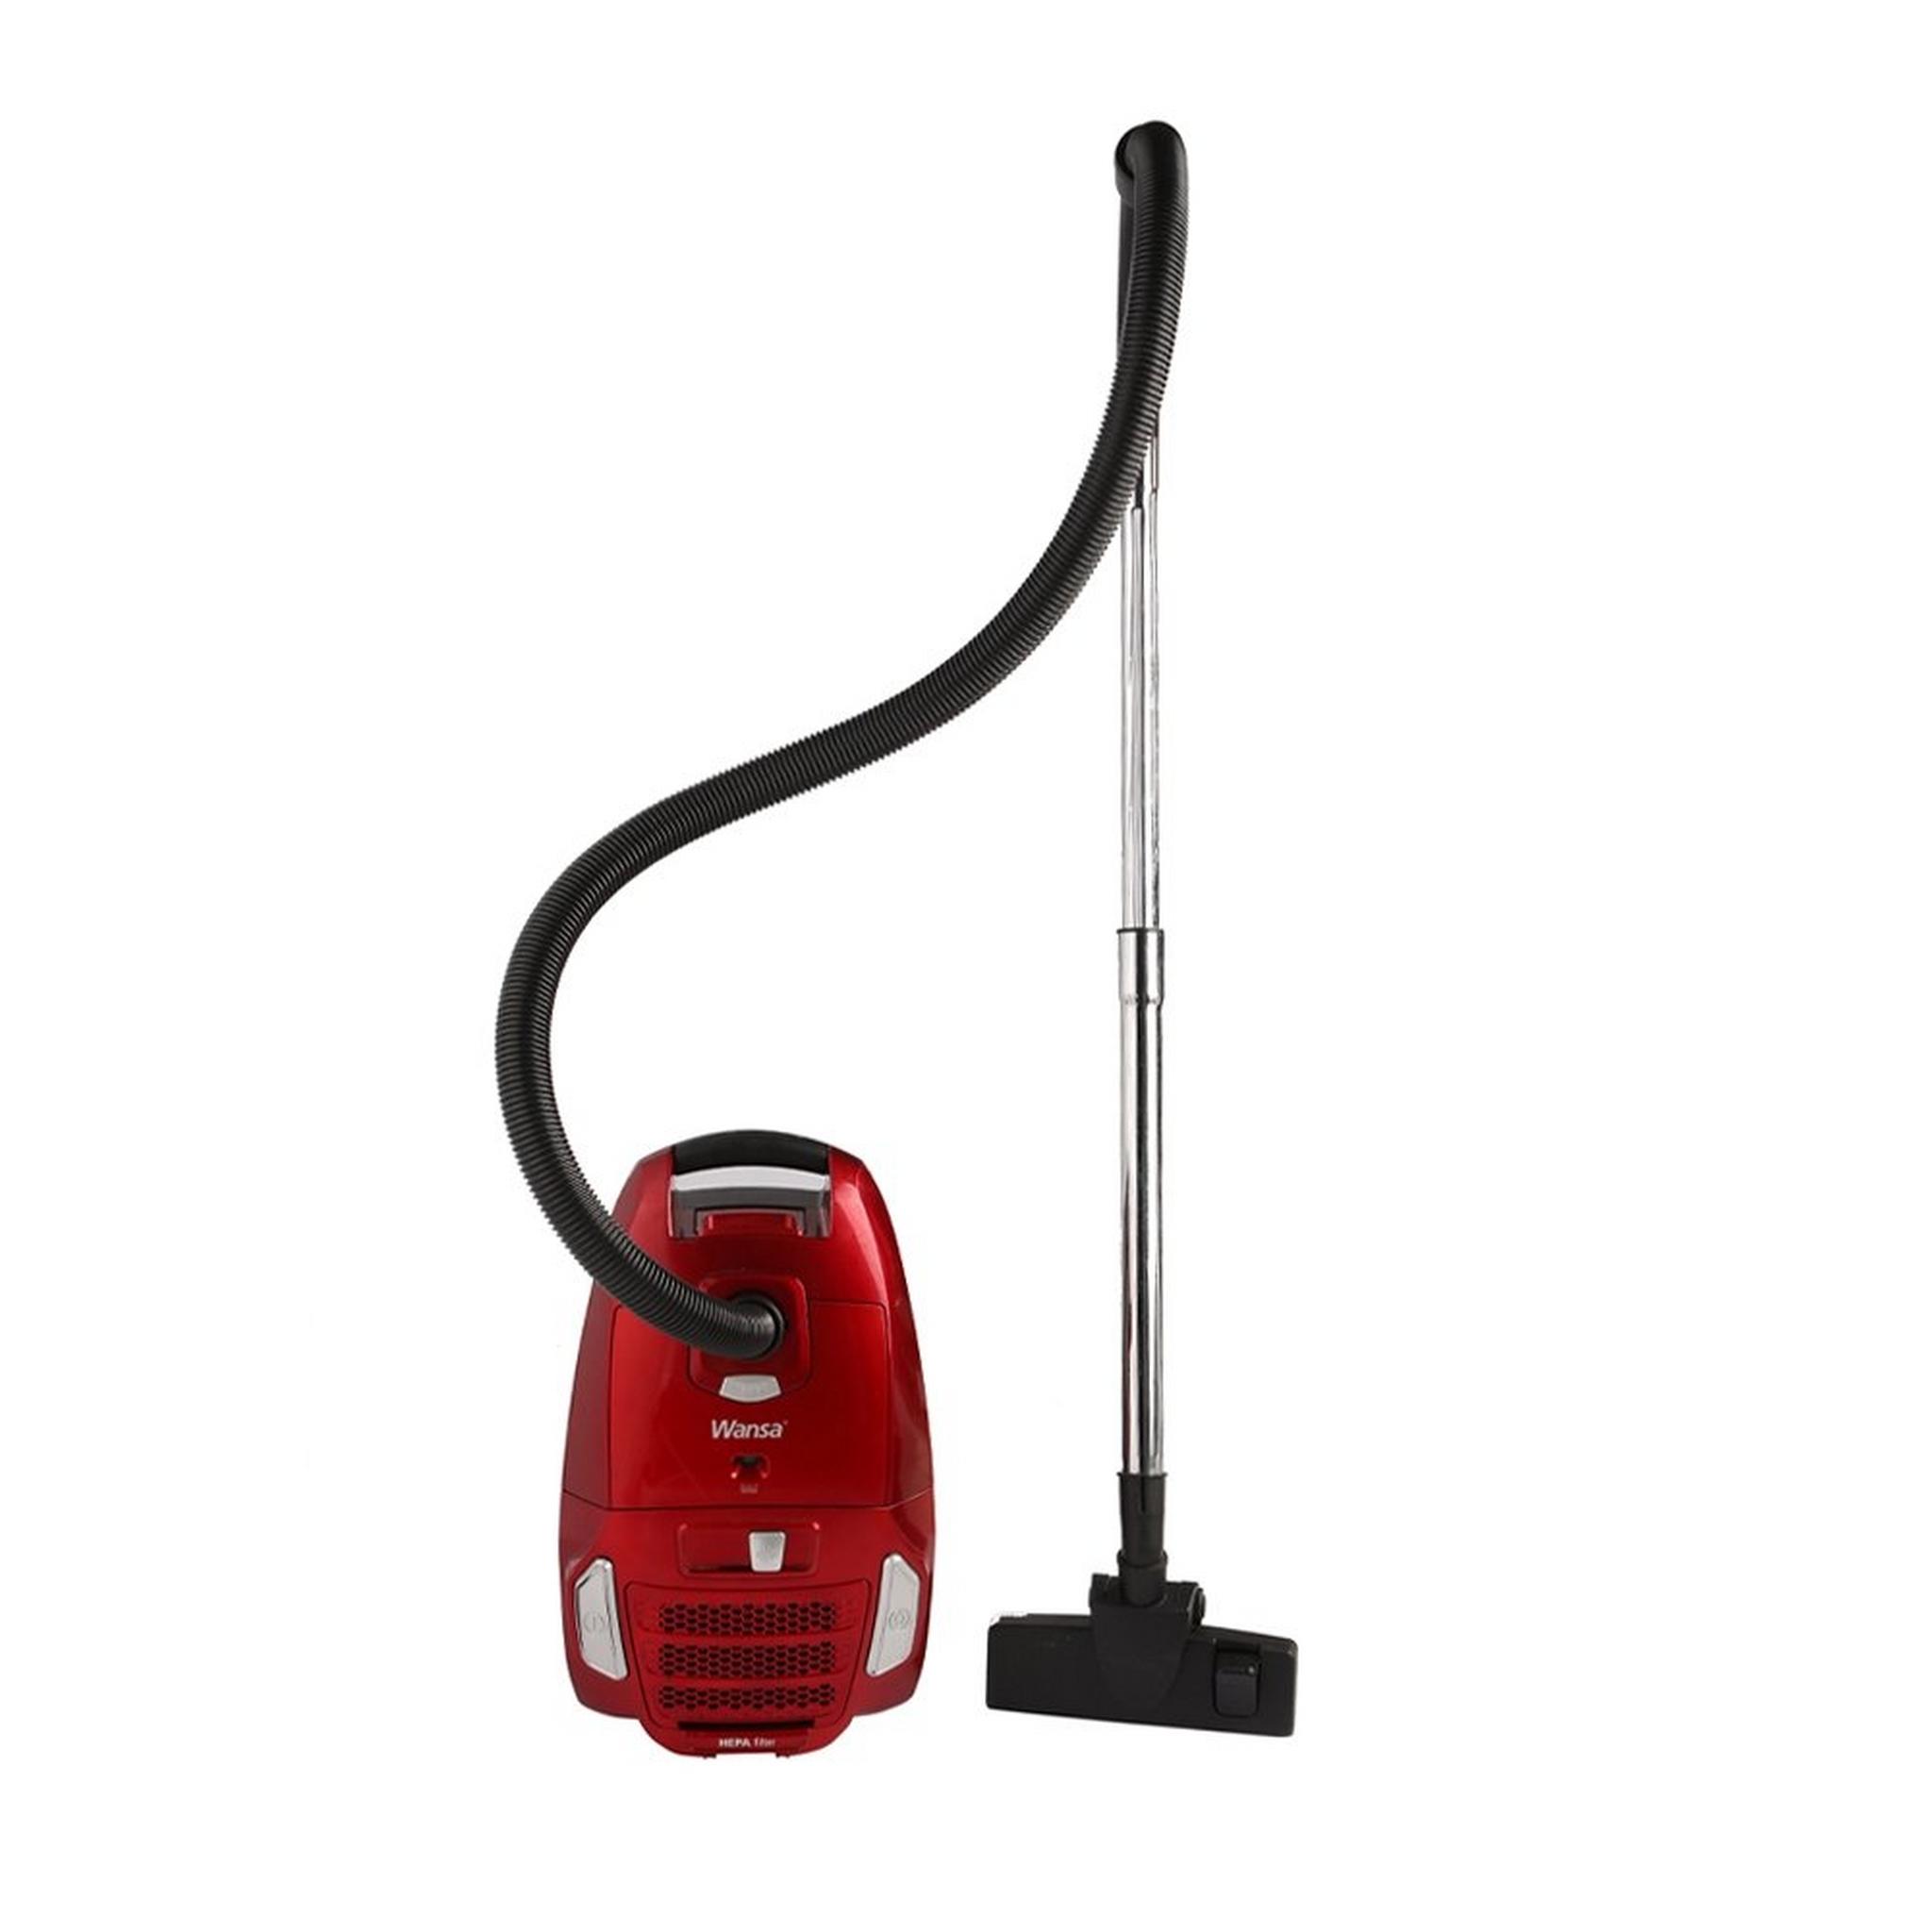 Wansa Canister Vacuum Cleaner 2400 Watts (VCB50A14E-D) | Floor Care ...